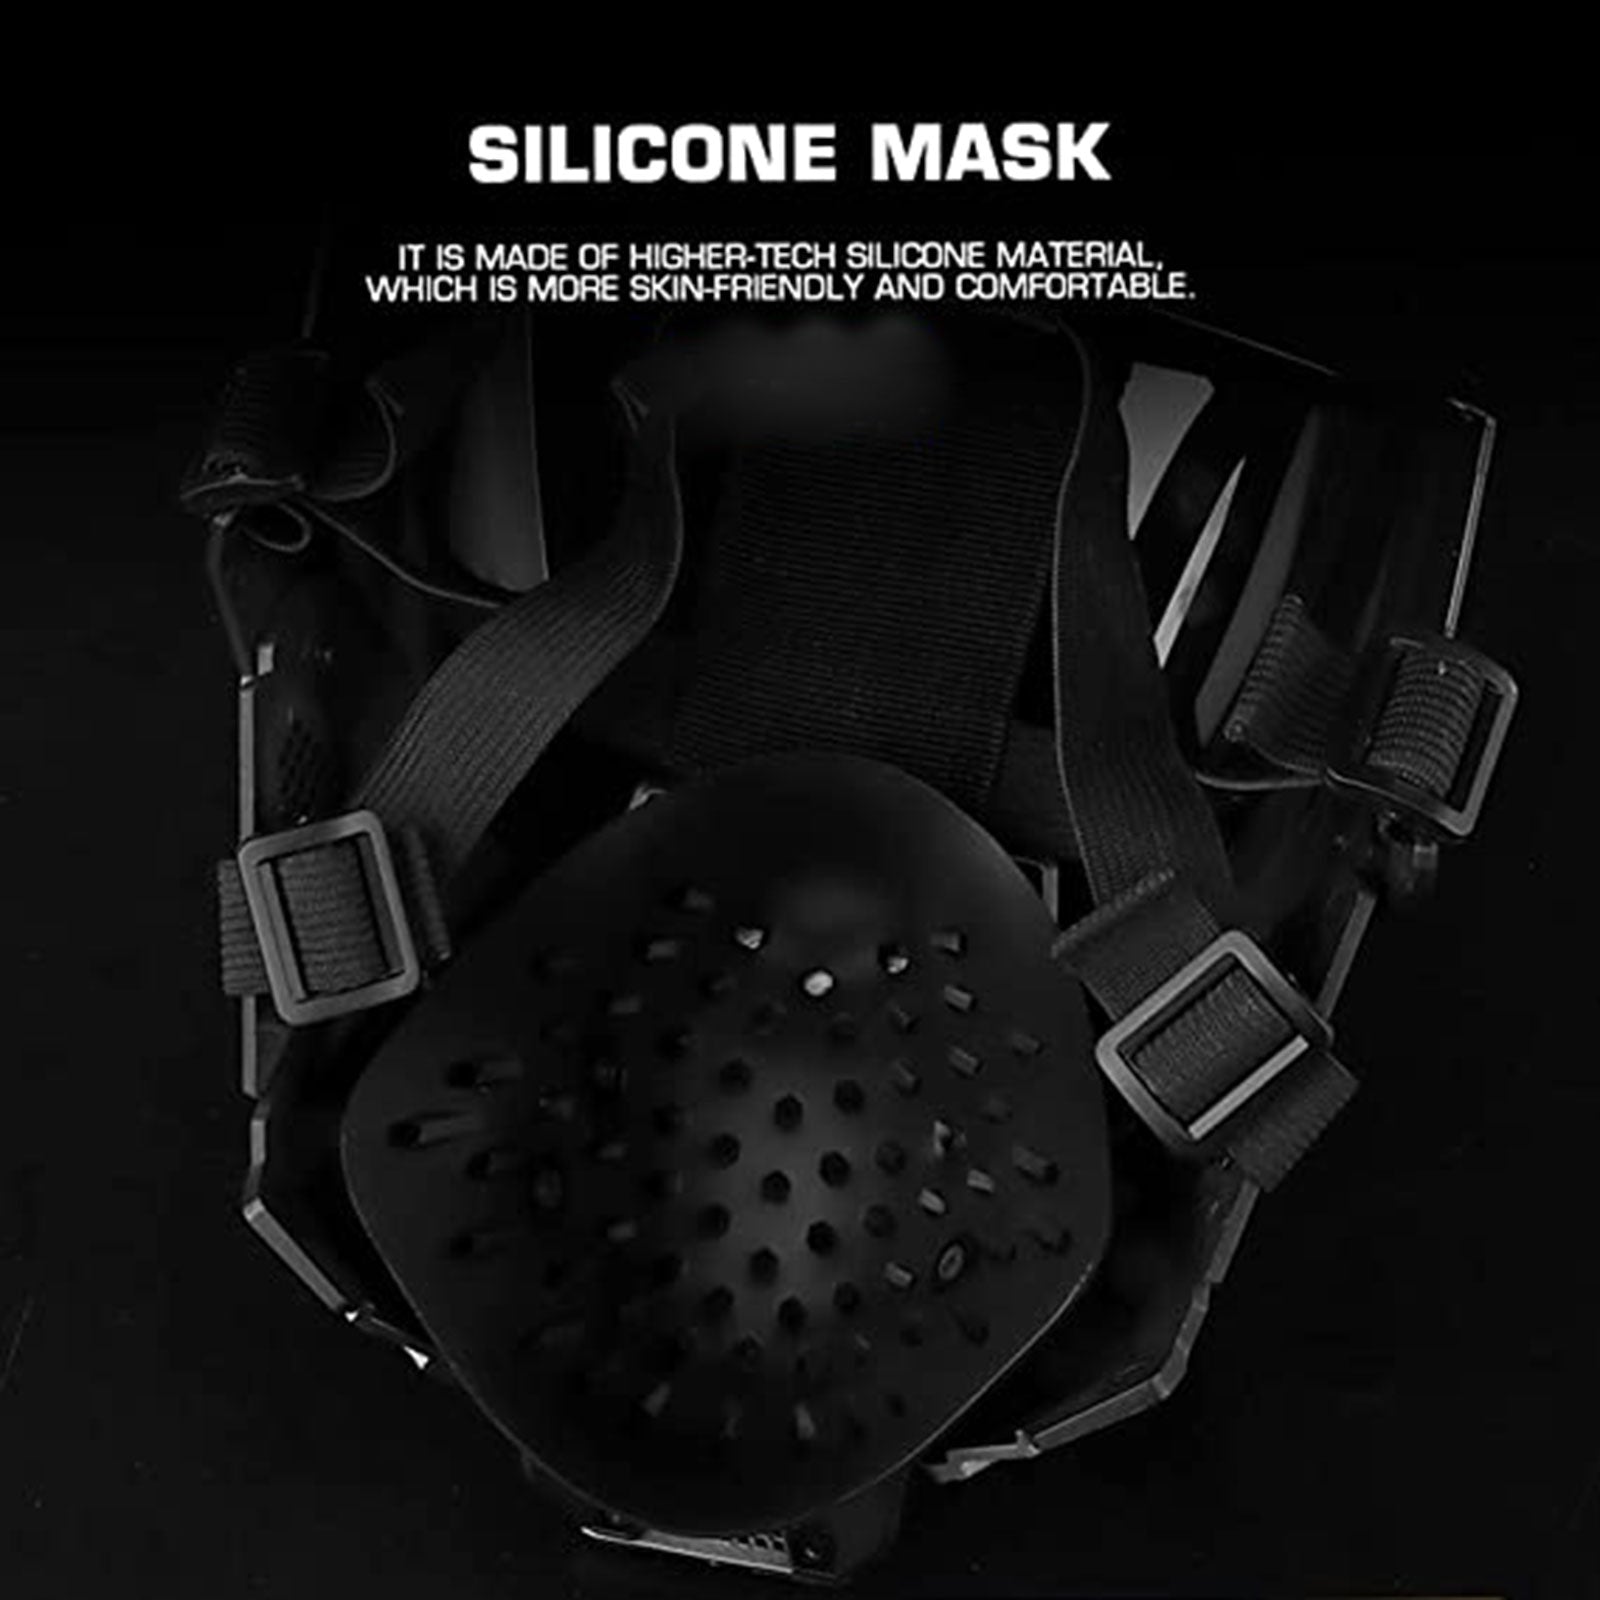 JAUPTO Punk Mask Helmet Cosplay for Men and Women, Futuristic Punk Techwear, Halloween Cosplay Fit Party Music Festival Accessories with Light